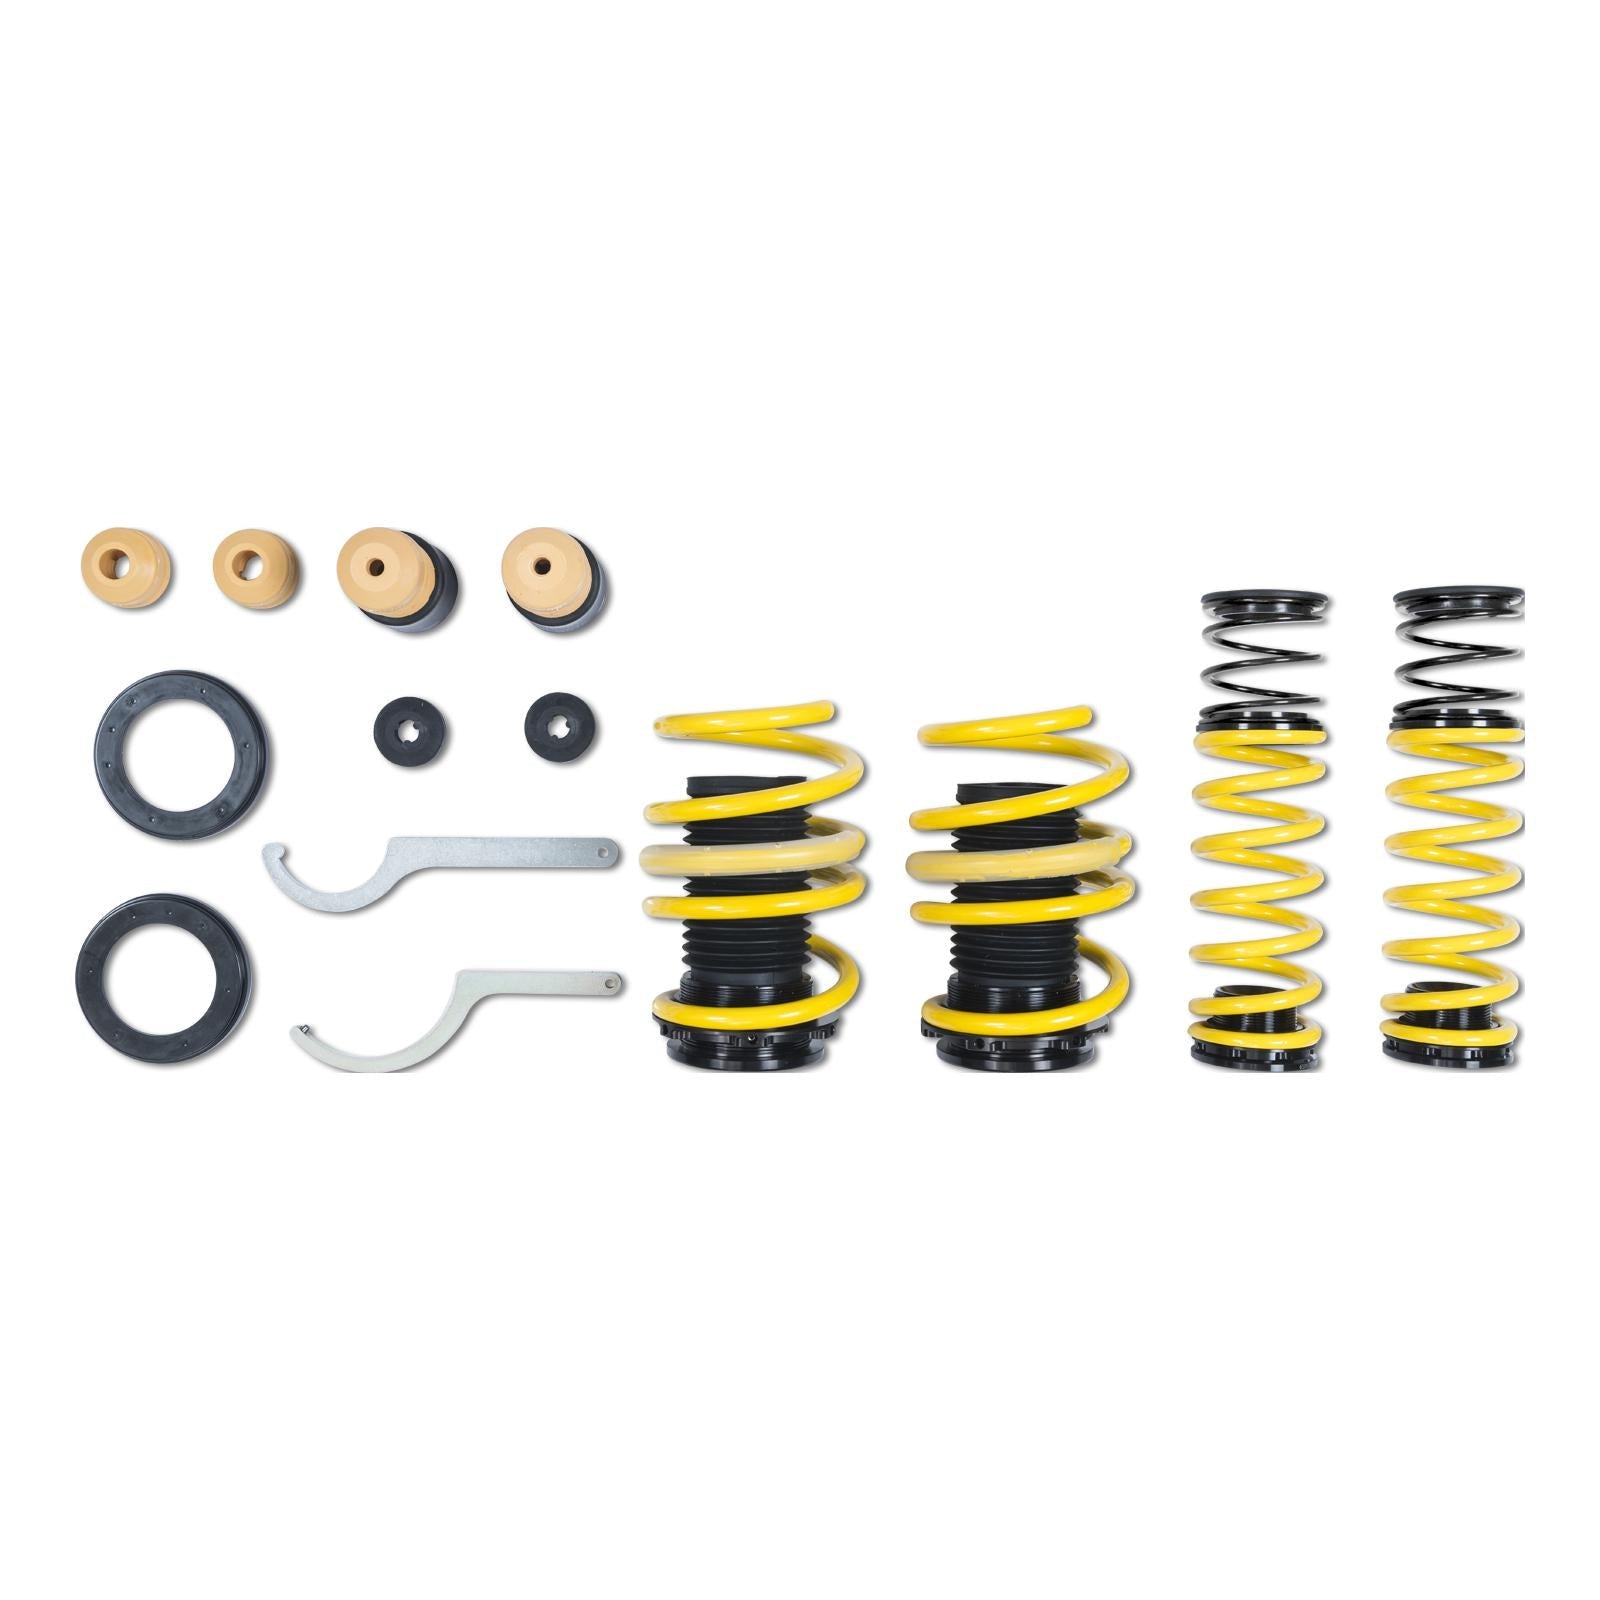 ST Suspensions Adjustable Lowering Springs - BMW E82 M Coupe, E90/E92 M3